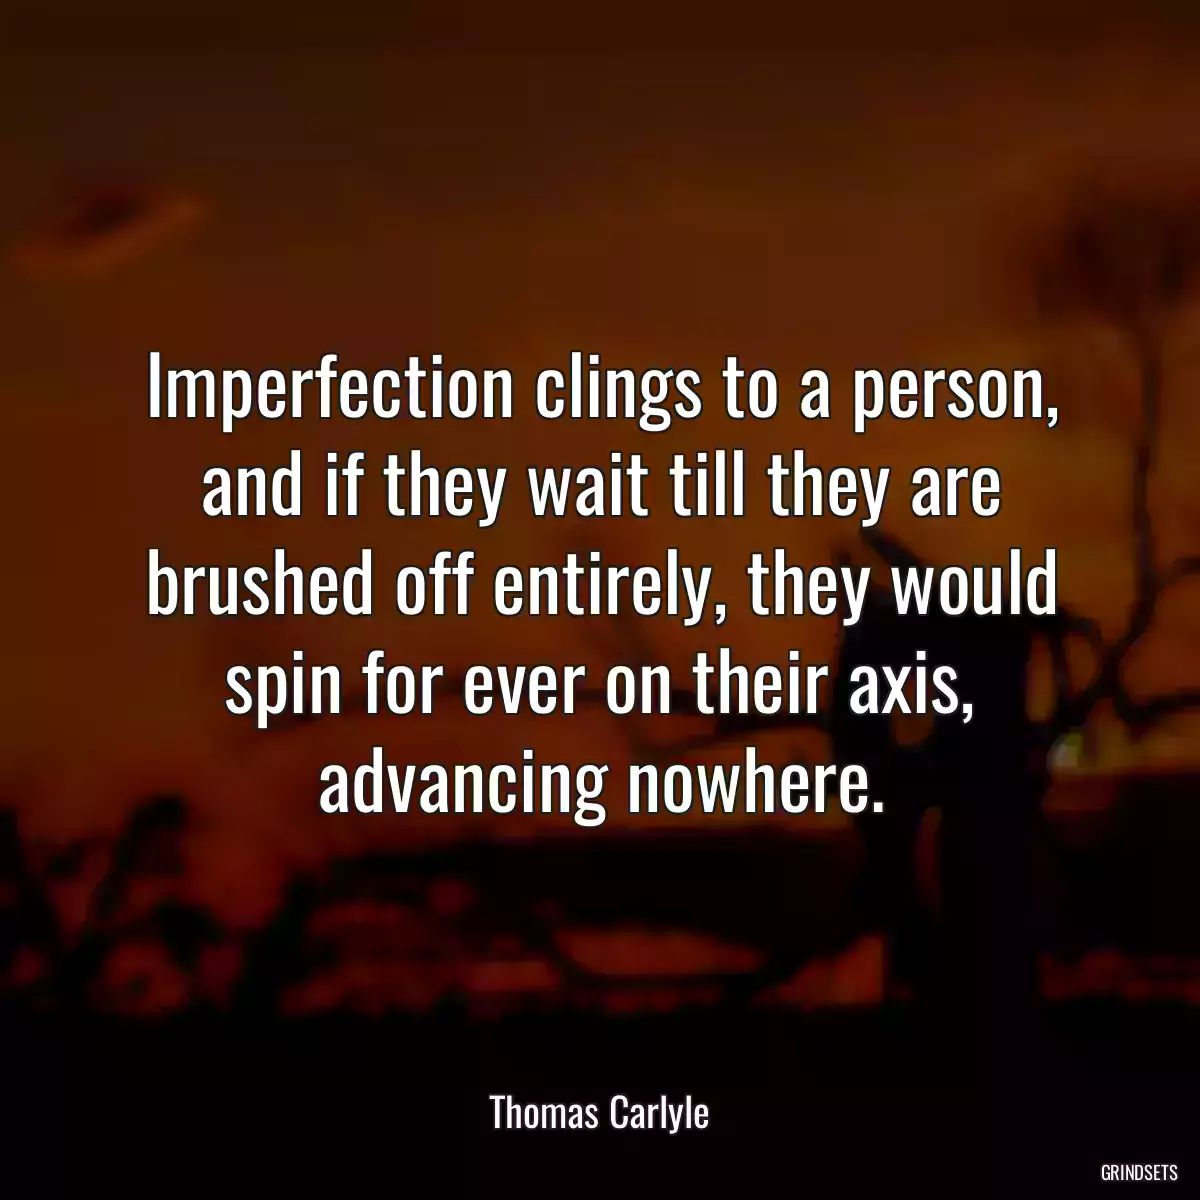 Imperfection clings to a person, and if they wait till they are brushed off entirely, they would spin for ever on their axis, advancing nowhere.